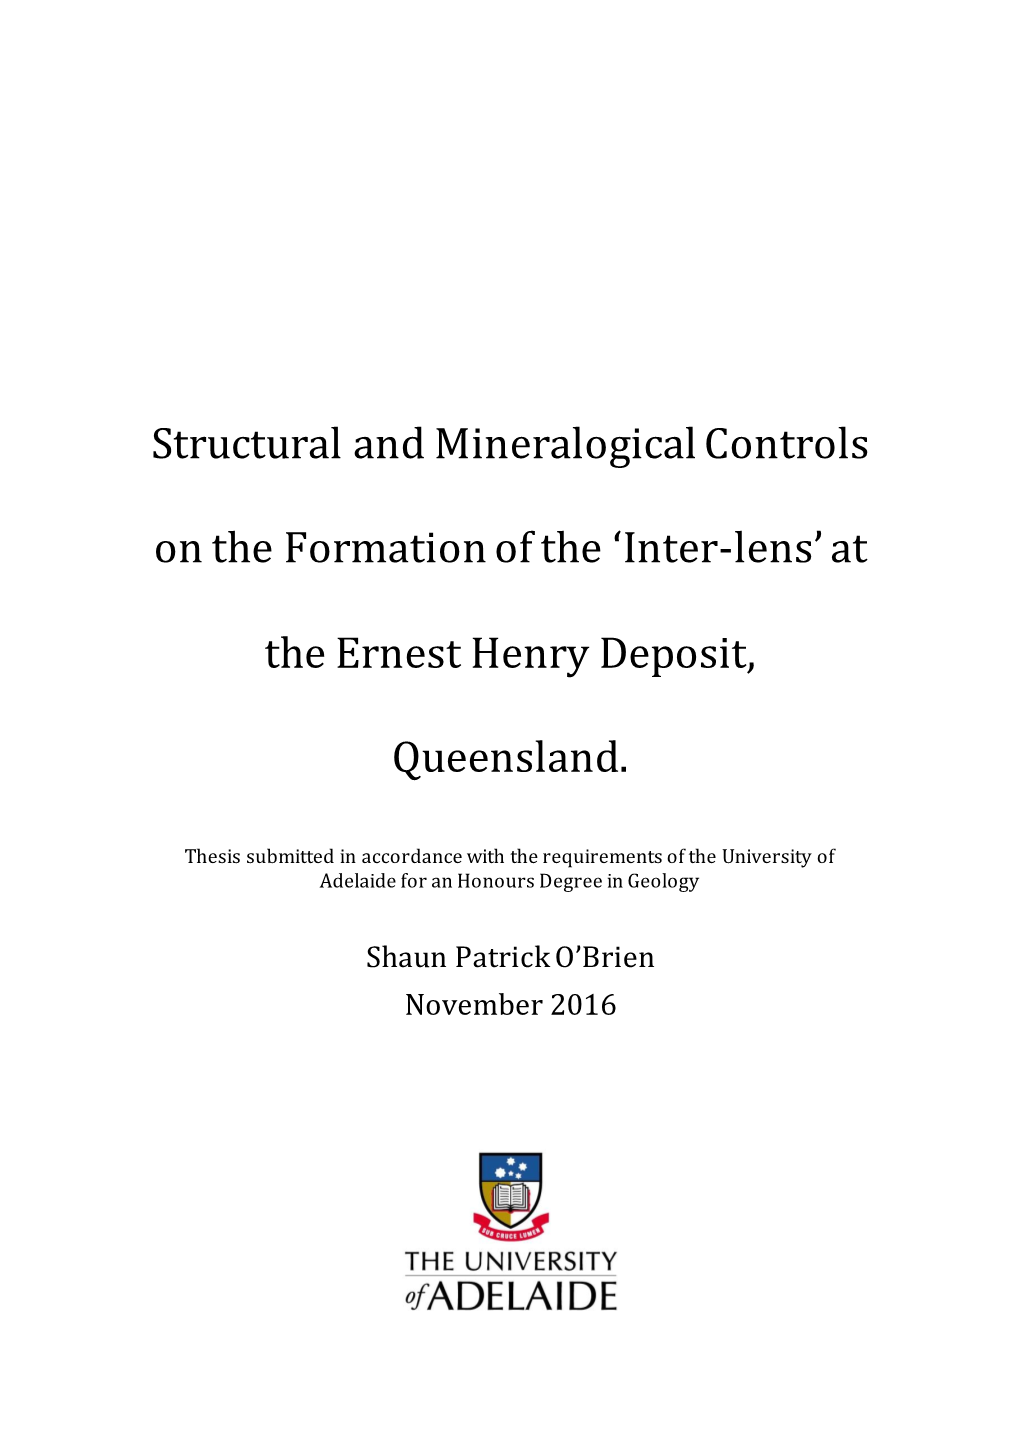 Structural and Mineralogical Controls on the Formation of the 'Inter-Lens' At